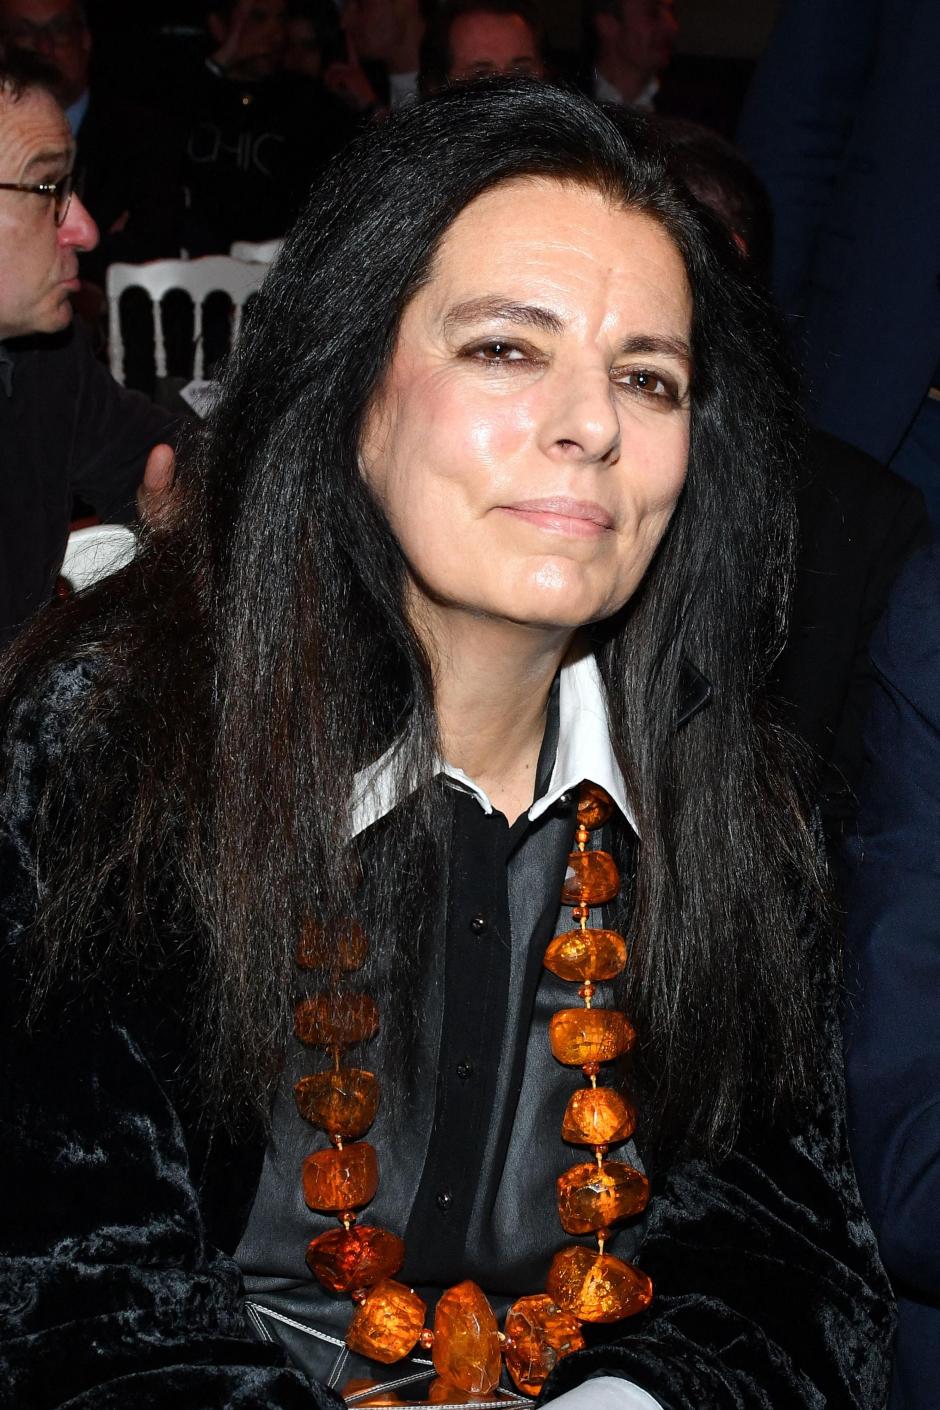 File photo dated March 24, 2019 shows Francoise Bettencourt-Meyers in Paris, France. Francoise Bettencourt Meyers, the L'Oreal heiress and richest woman in the world, has become the first woman to hold a $ 100 billion fortune, Bloomberg reported Thursday. The Bloomberg Billionaire's Index, which reflects changes as of 5 pm ET of the previous trading day, lists Bettencourt Meyers as the 12th richest person, just ahead of Mukesh Ambani and behind Carlos Slim, who recently became the first person from Latin America to cross the $ 100 billion threshold.
L'Oreal Heir Francoise Bettencourt Meyers Becomes First Woman With $100 Billion Fortune, Paris, France - 24 Mar 2019